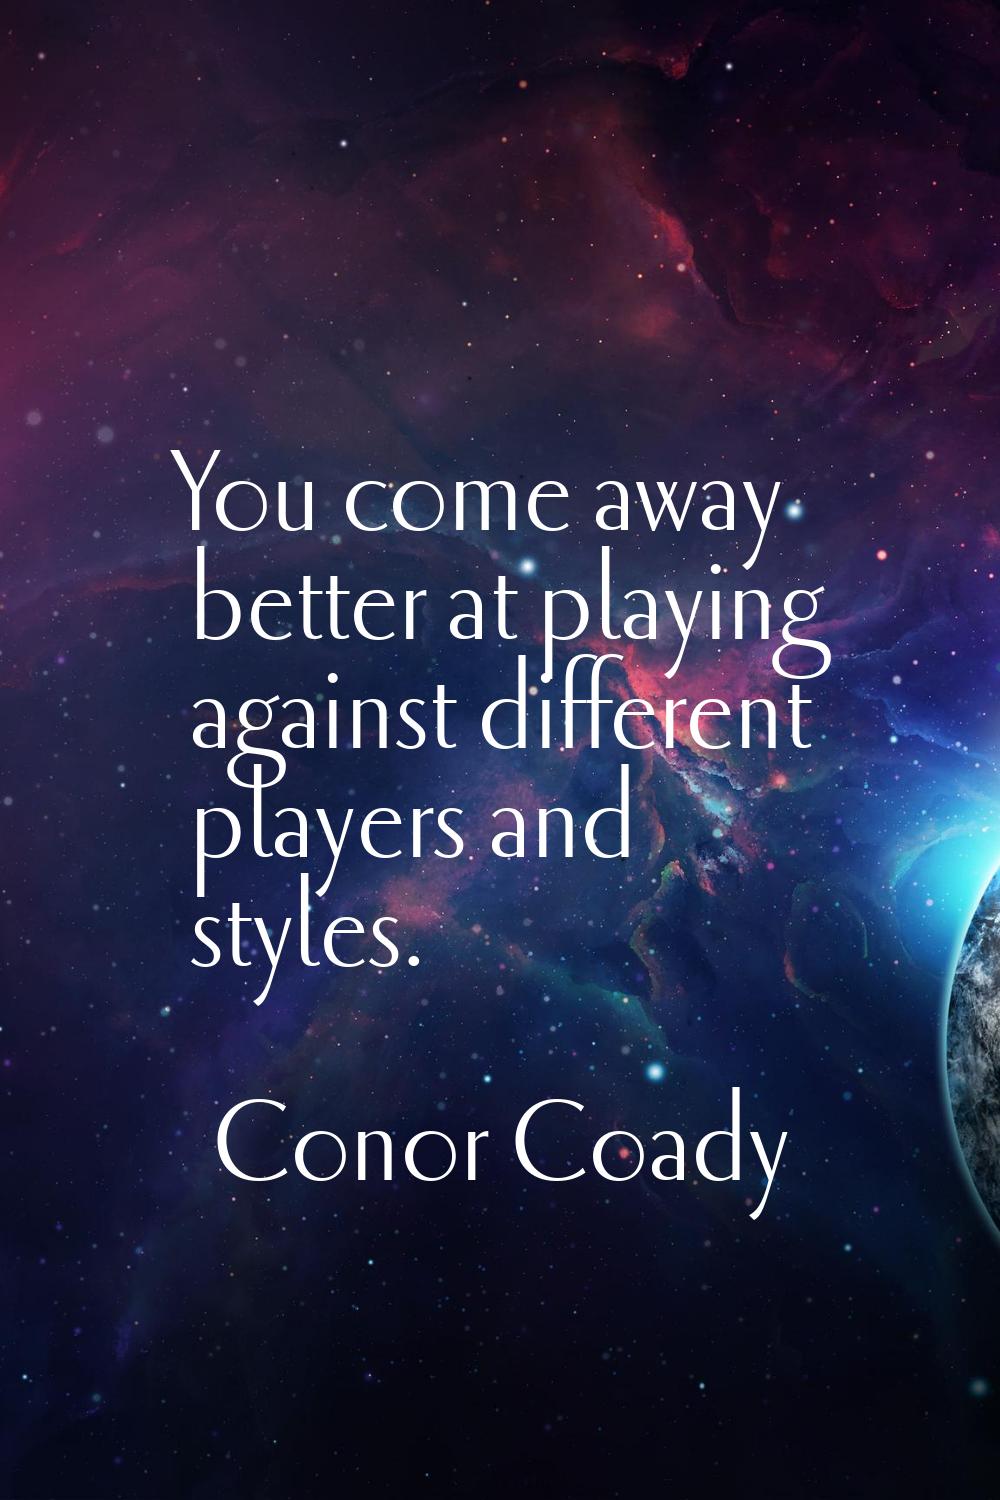 You come away better at playing against different players and styles.